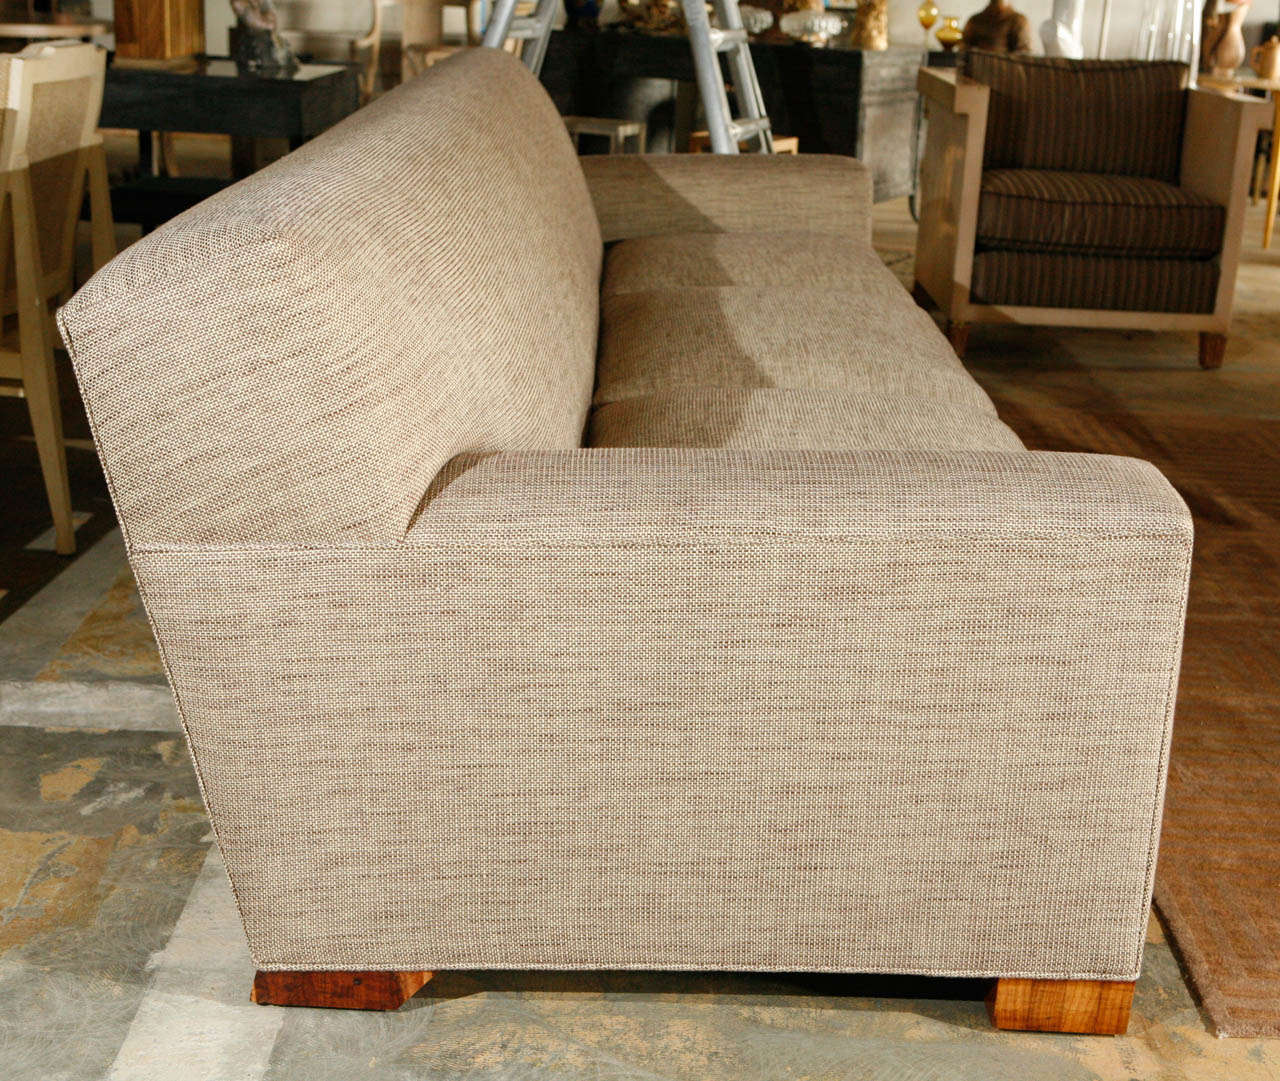 Large Scale Roy McMakin Sofa in New Ralph Lauren Upholstery 1